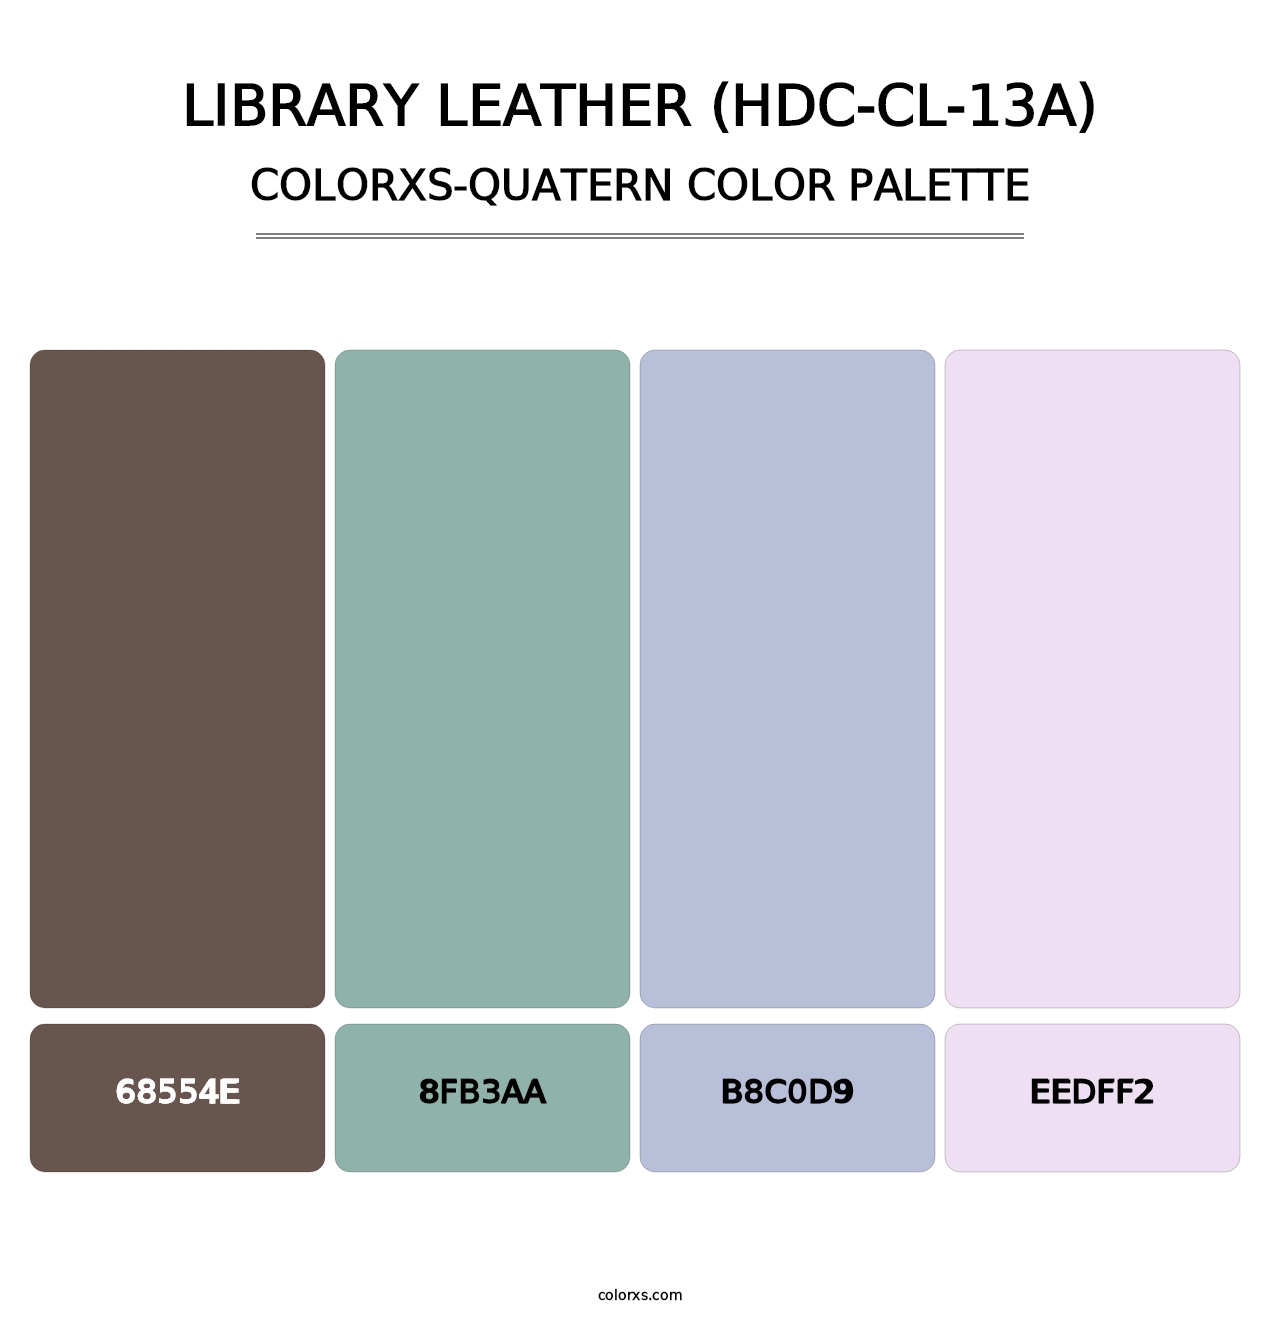 Library Leather (HDC-CL-13A) - Colorxs Quatern Palette